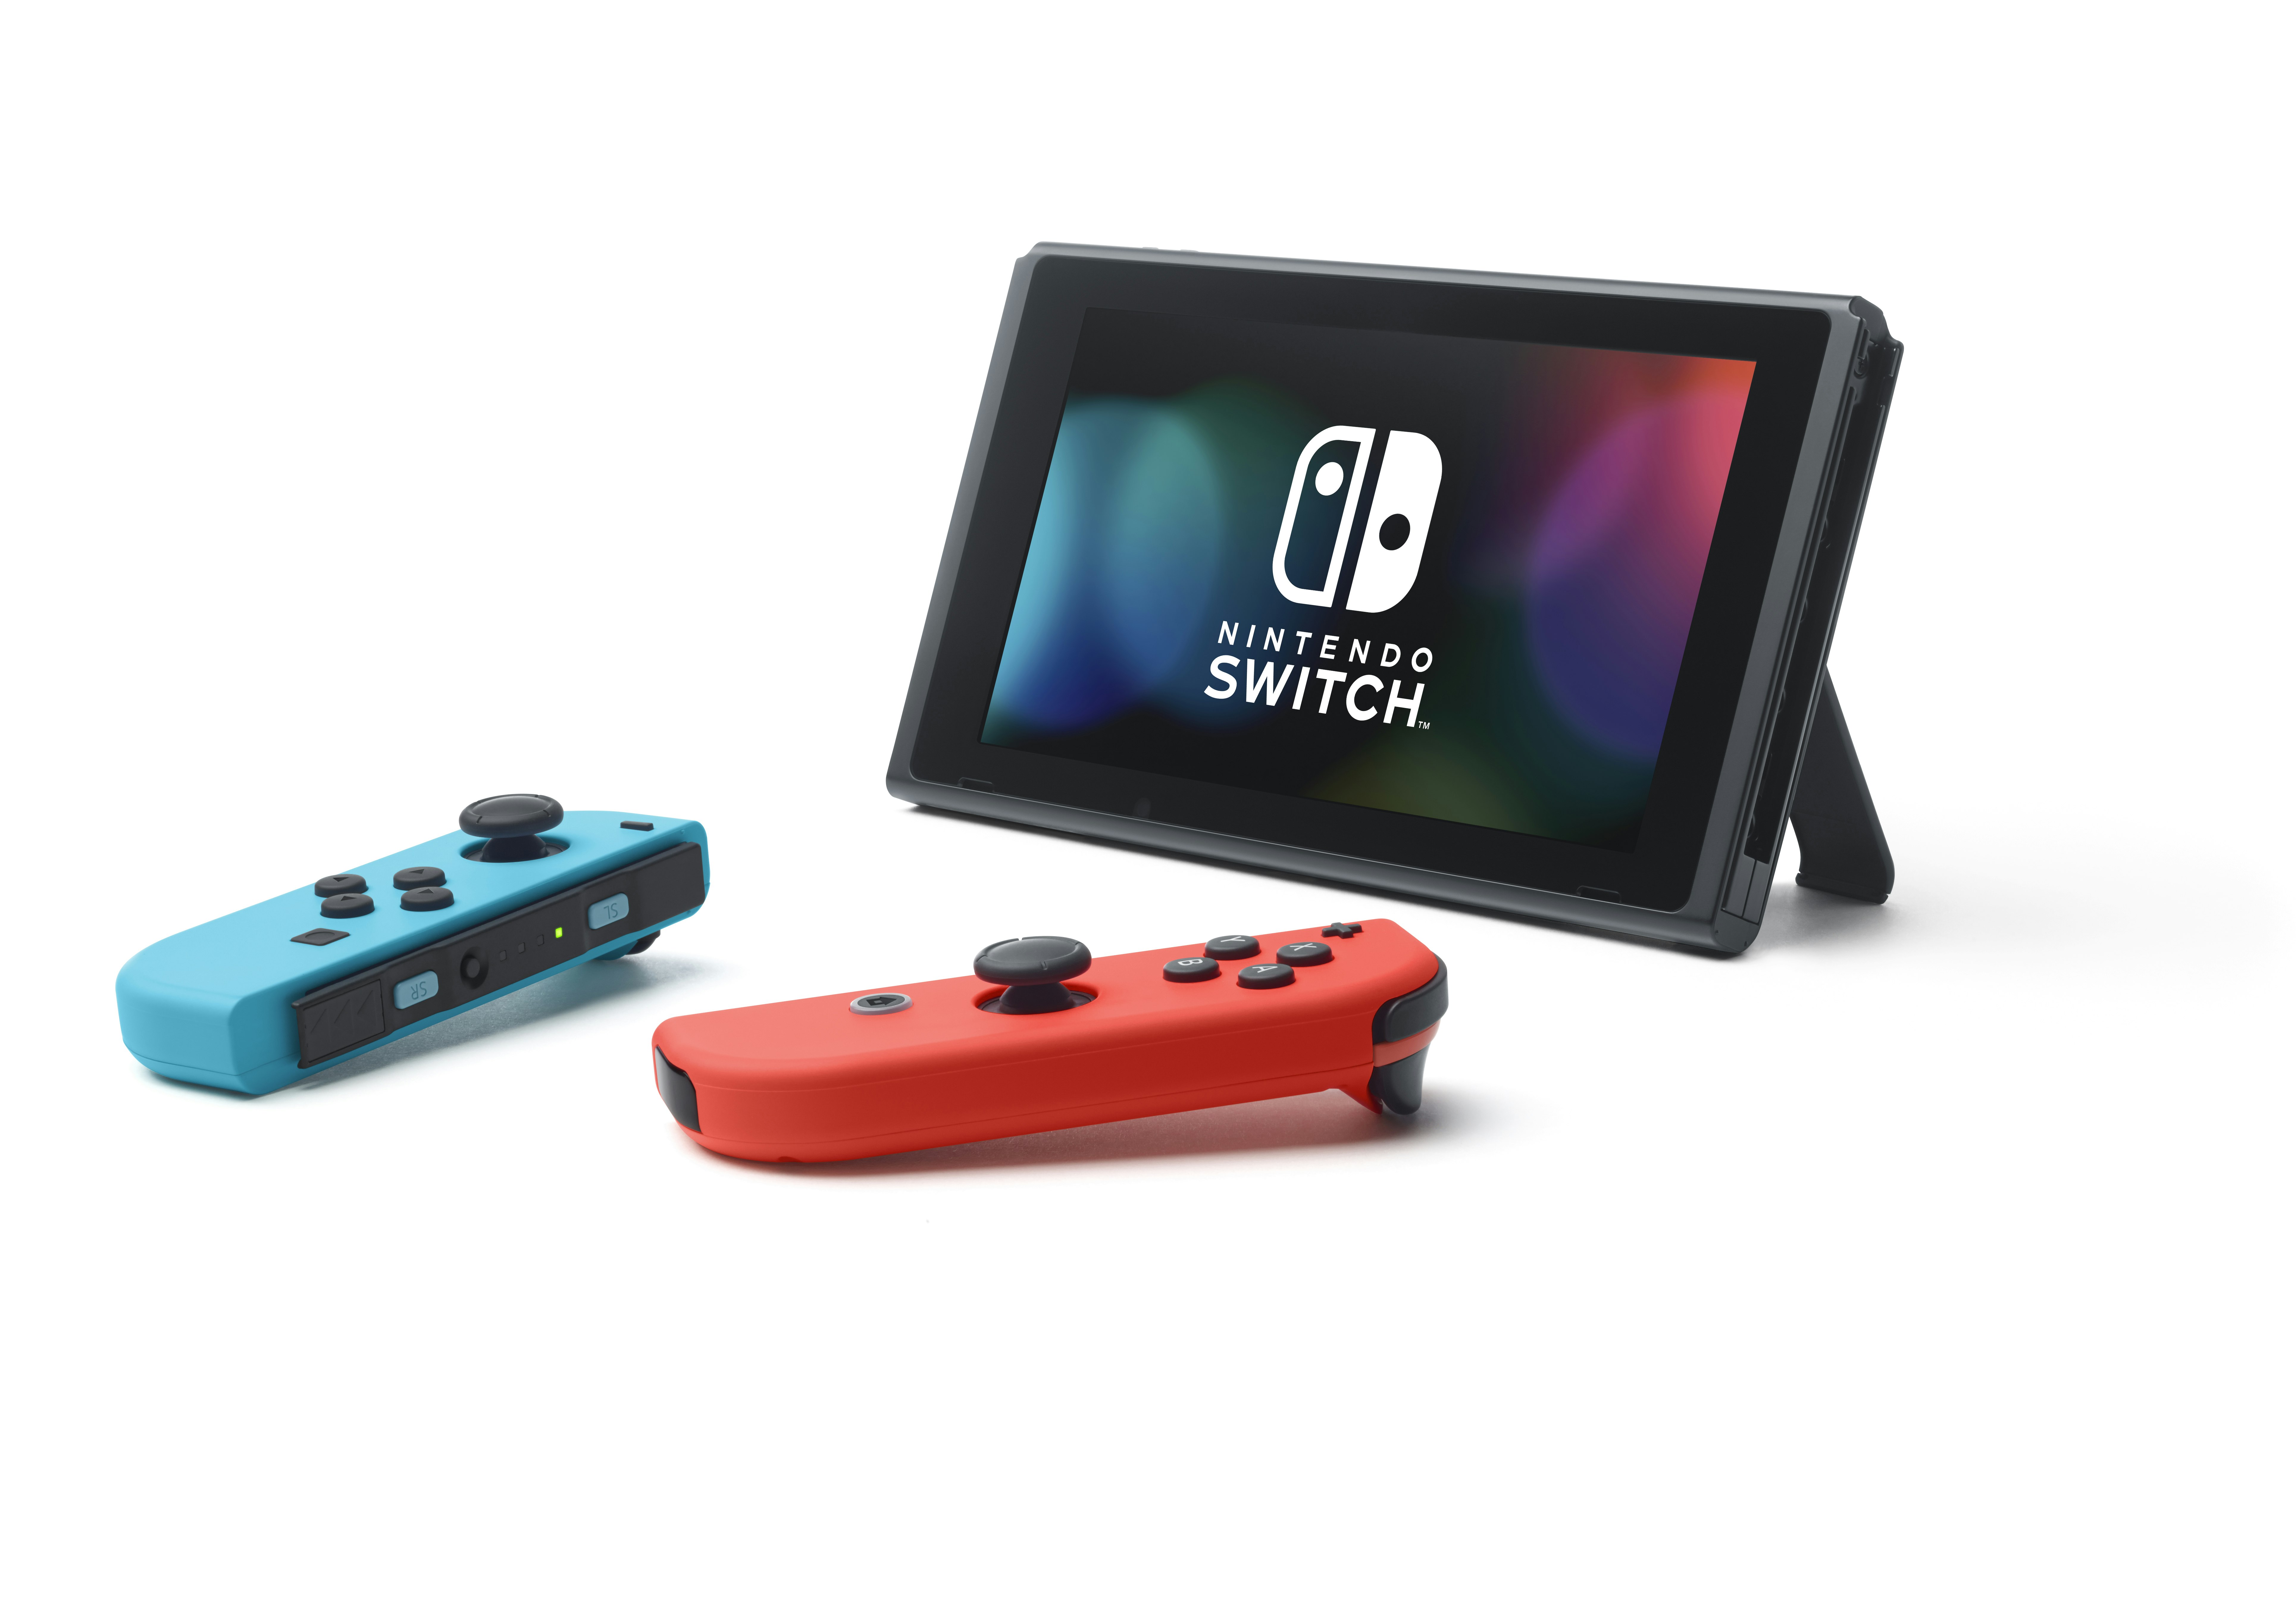 The Nintendo Switch with controllers detached